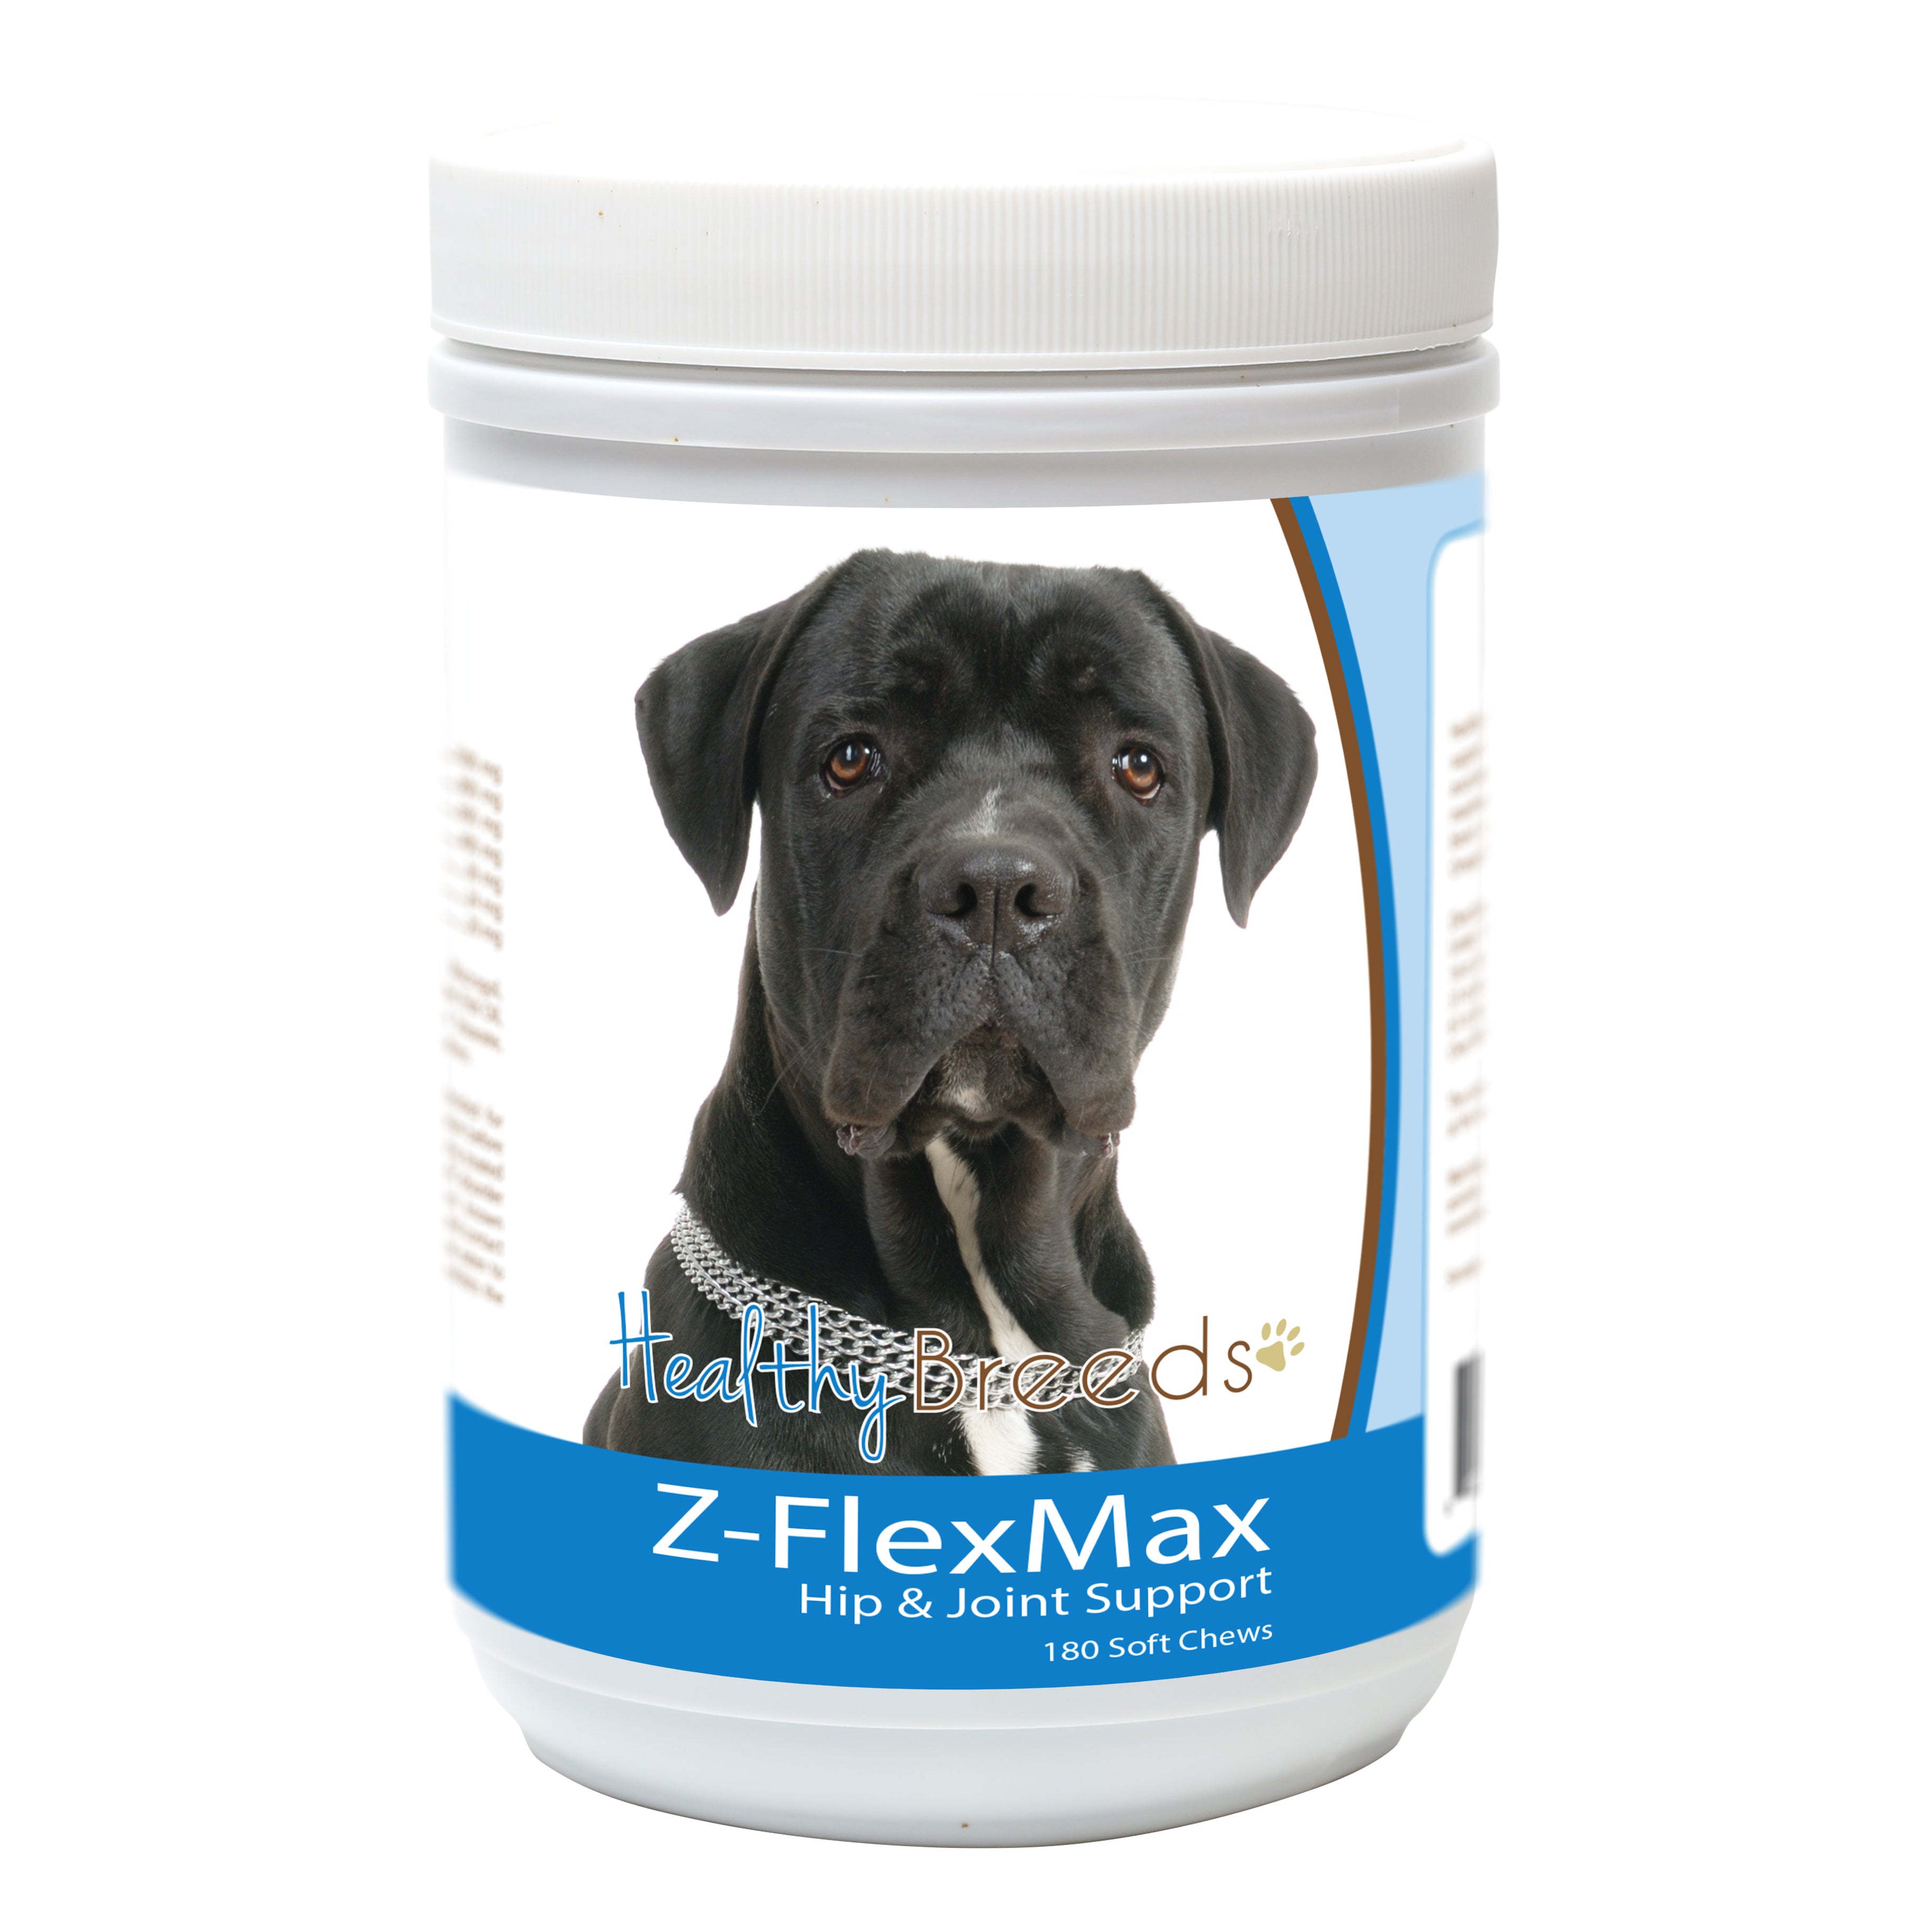 Cane Corso Z-Flex Max Dog Hip and Joint Support 180 Count